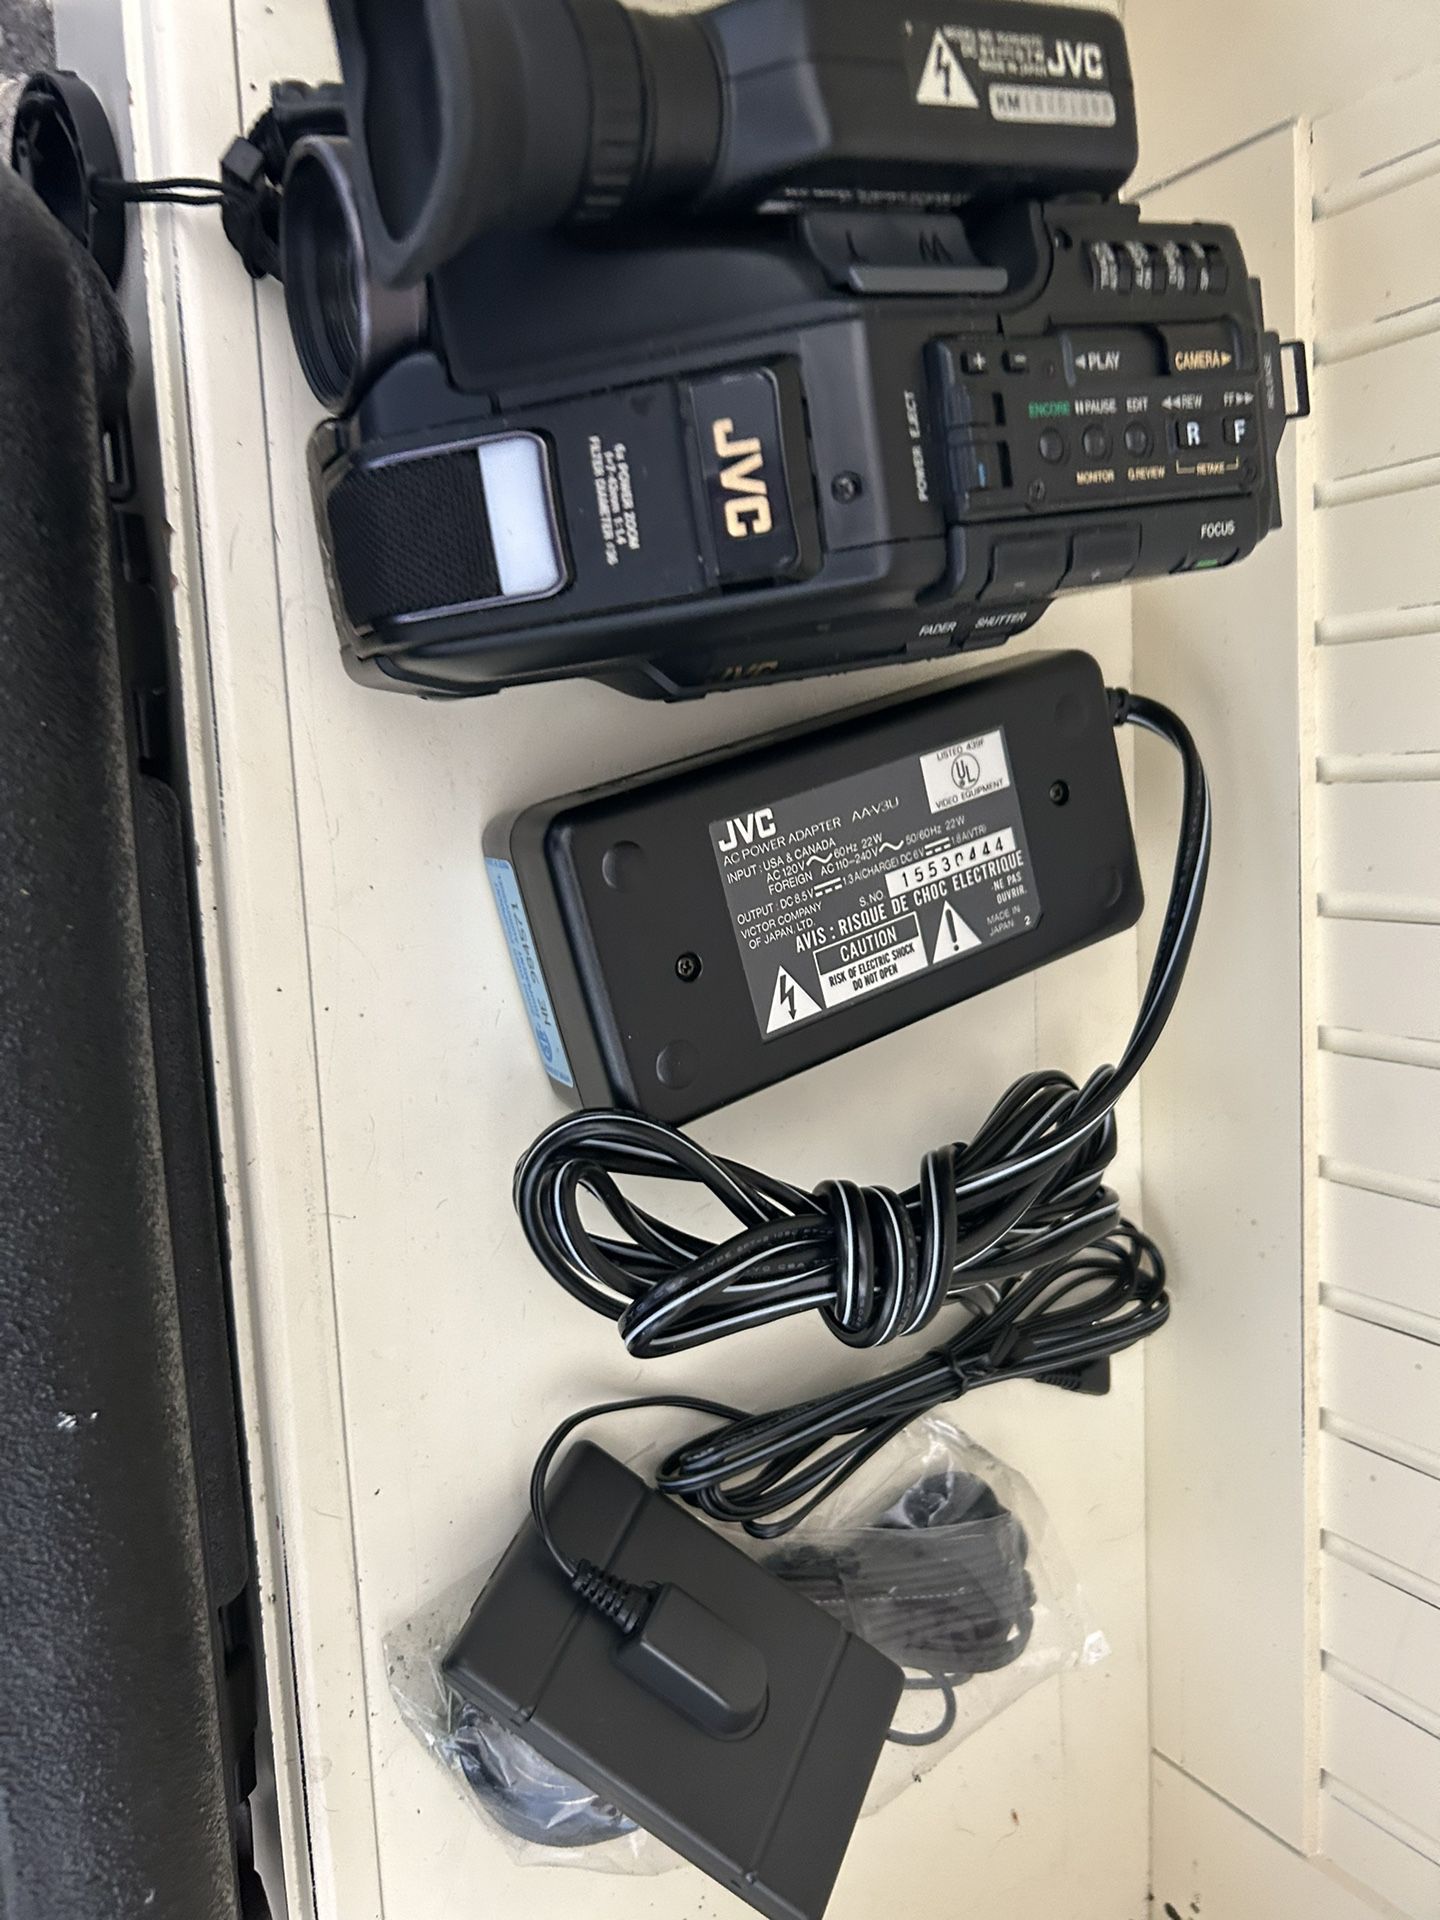 jvc GR-AX7 vhs camcorder with accessories and carrying case